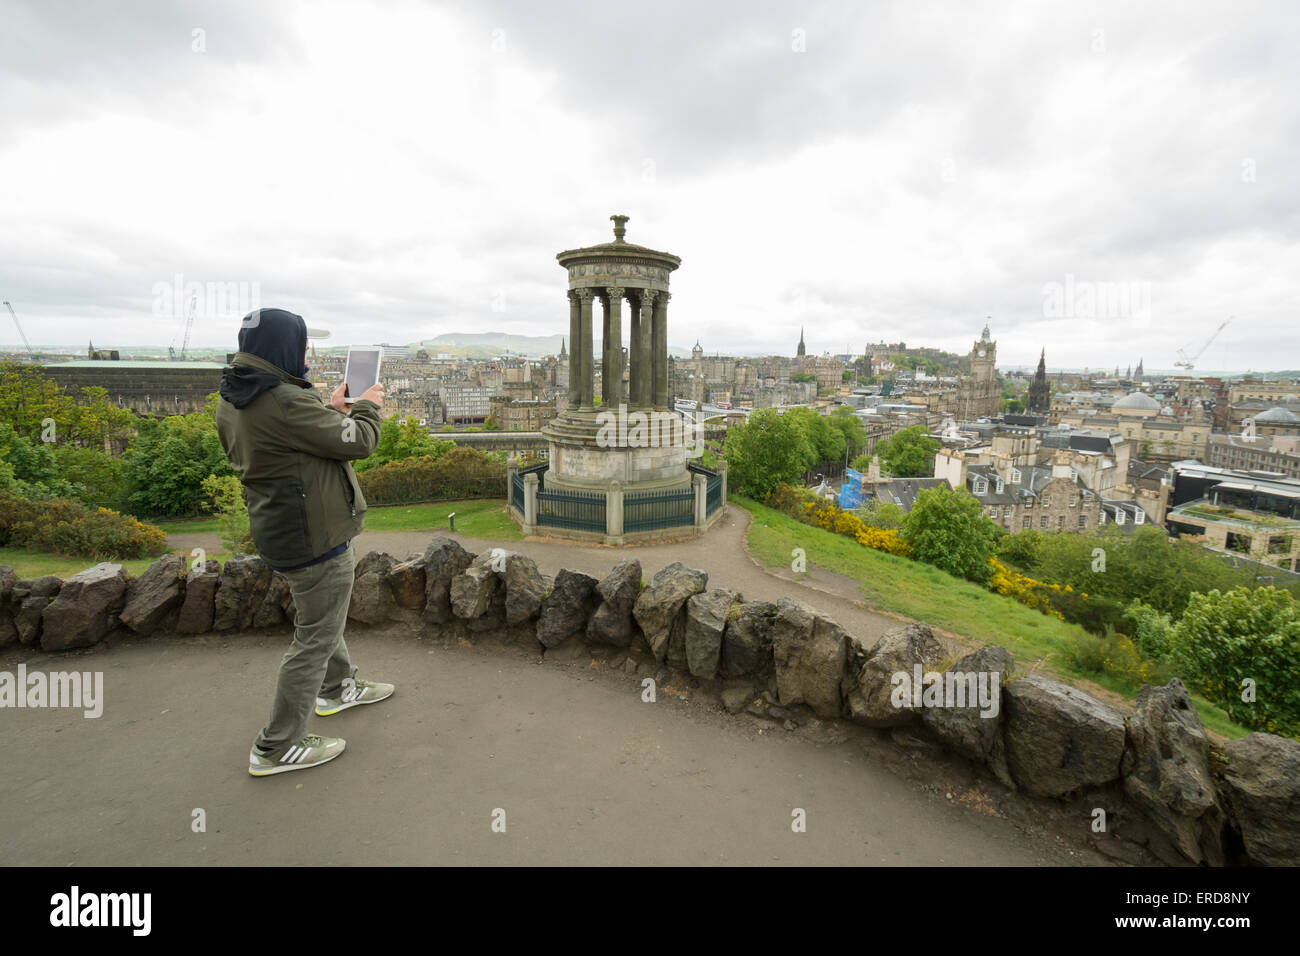 man-taking-a-photo-on-an-ipad-of-the-dugald-stewart-monument-and-view-ERD8NY.jpg